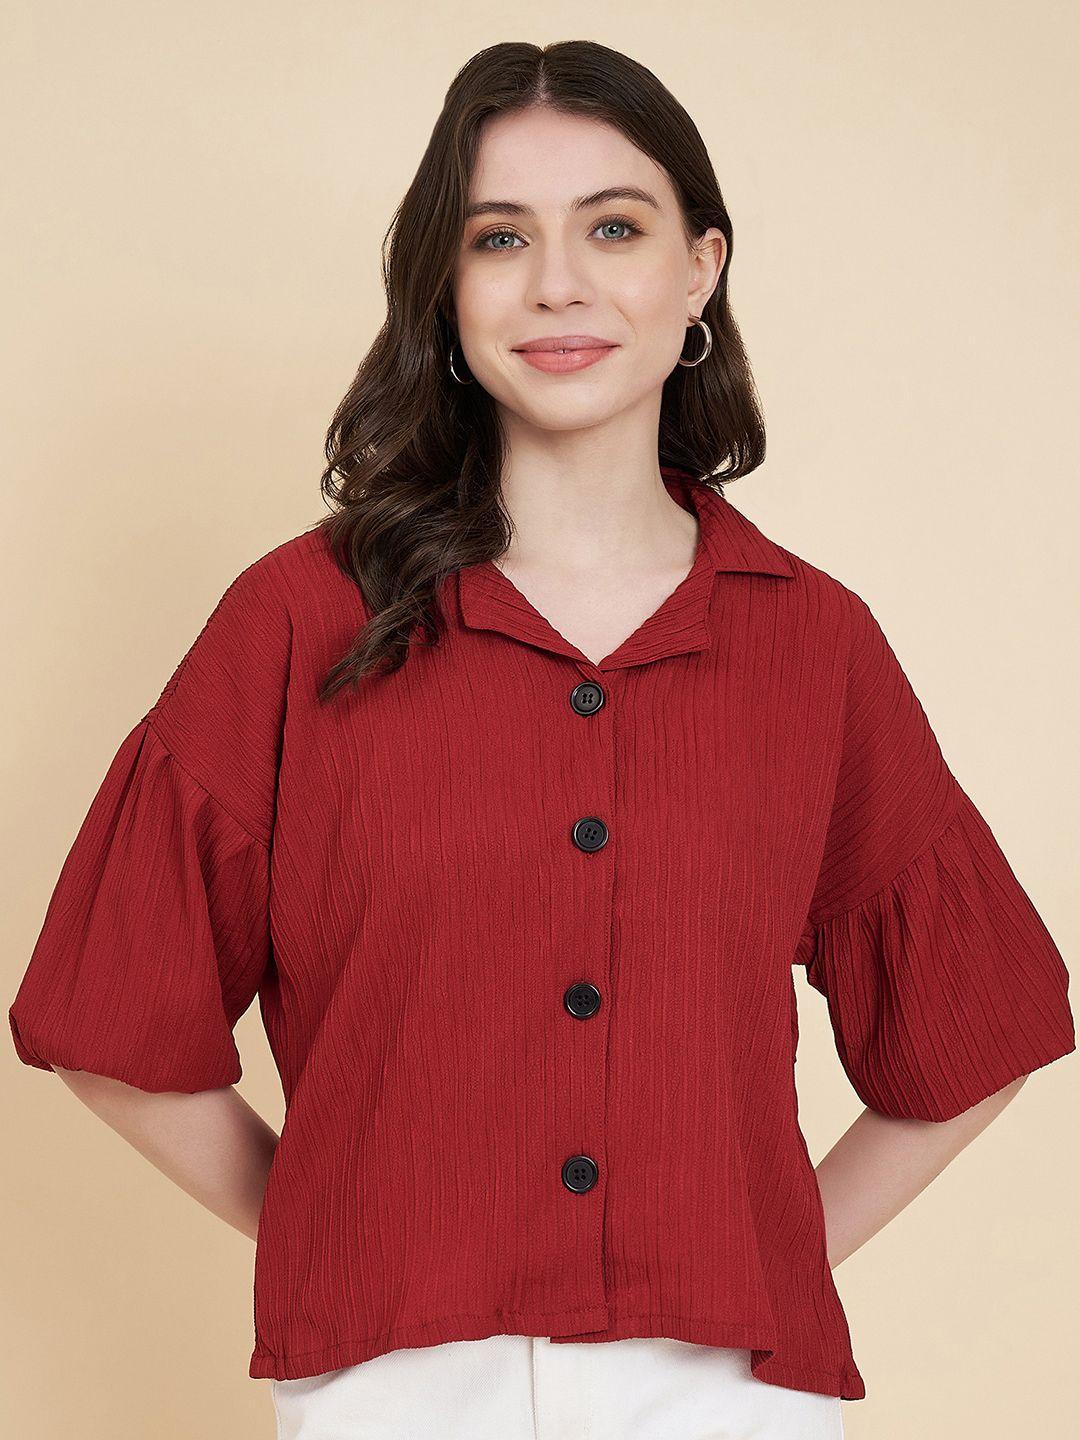 vairagee-women-red-classic-boxy-striped-casual-shirt